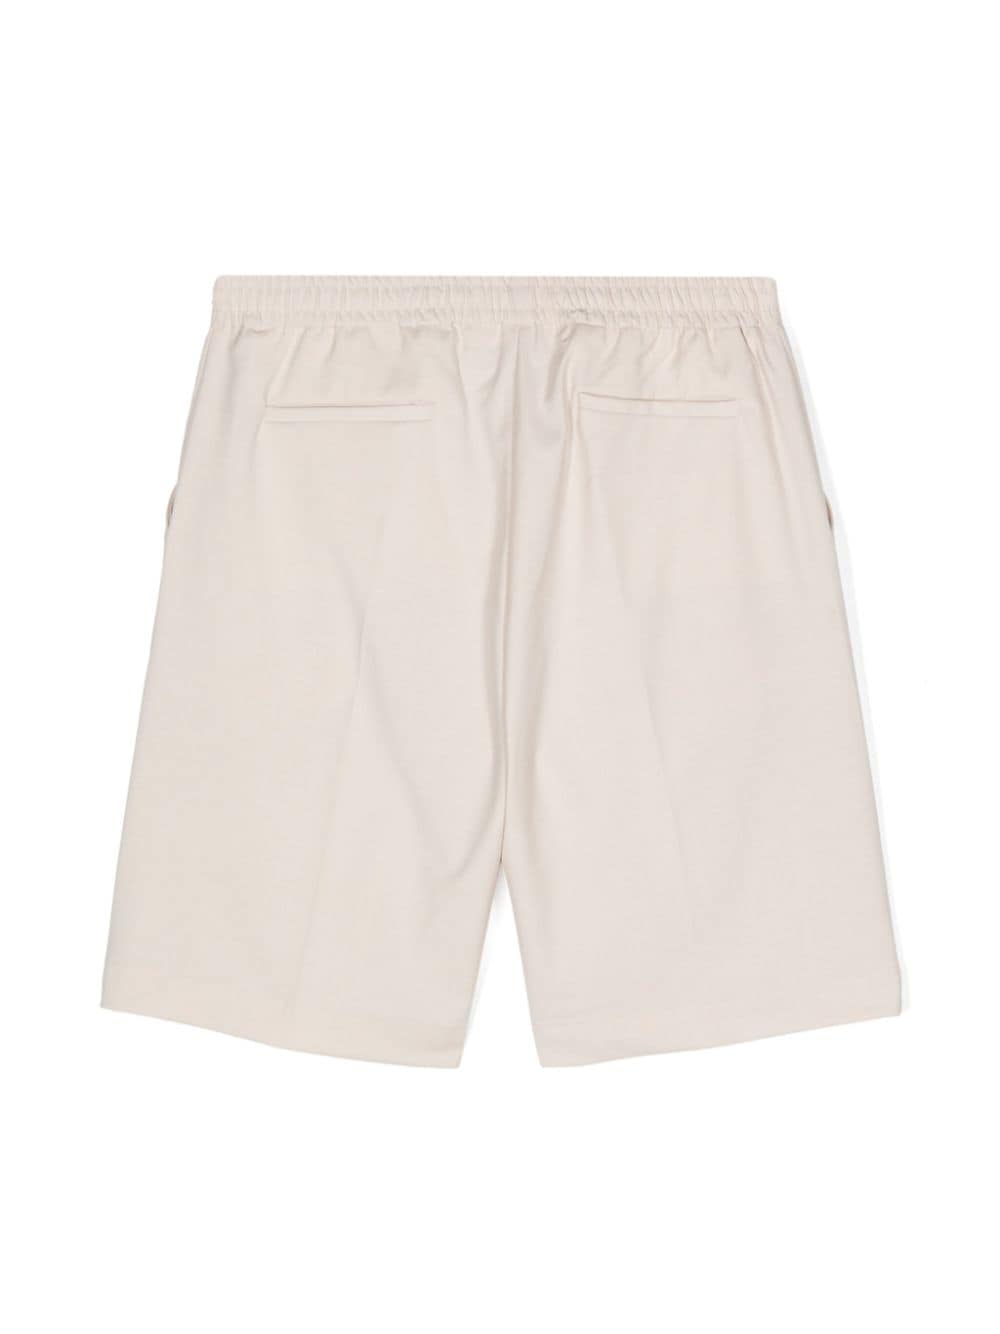 Paolo Pecora Kids pressed-crease shorts - Beige